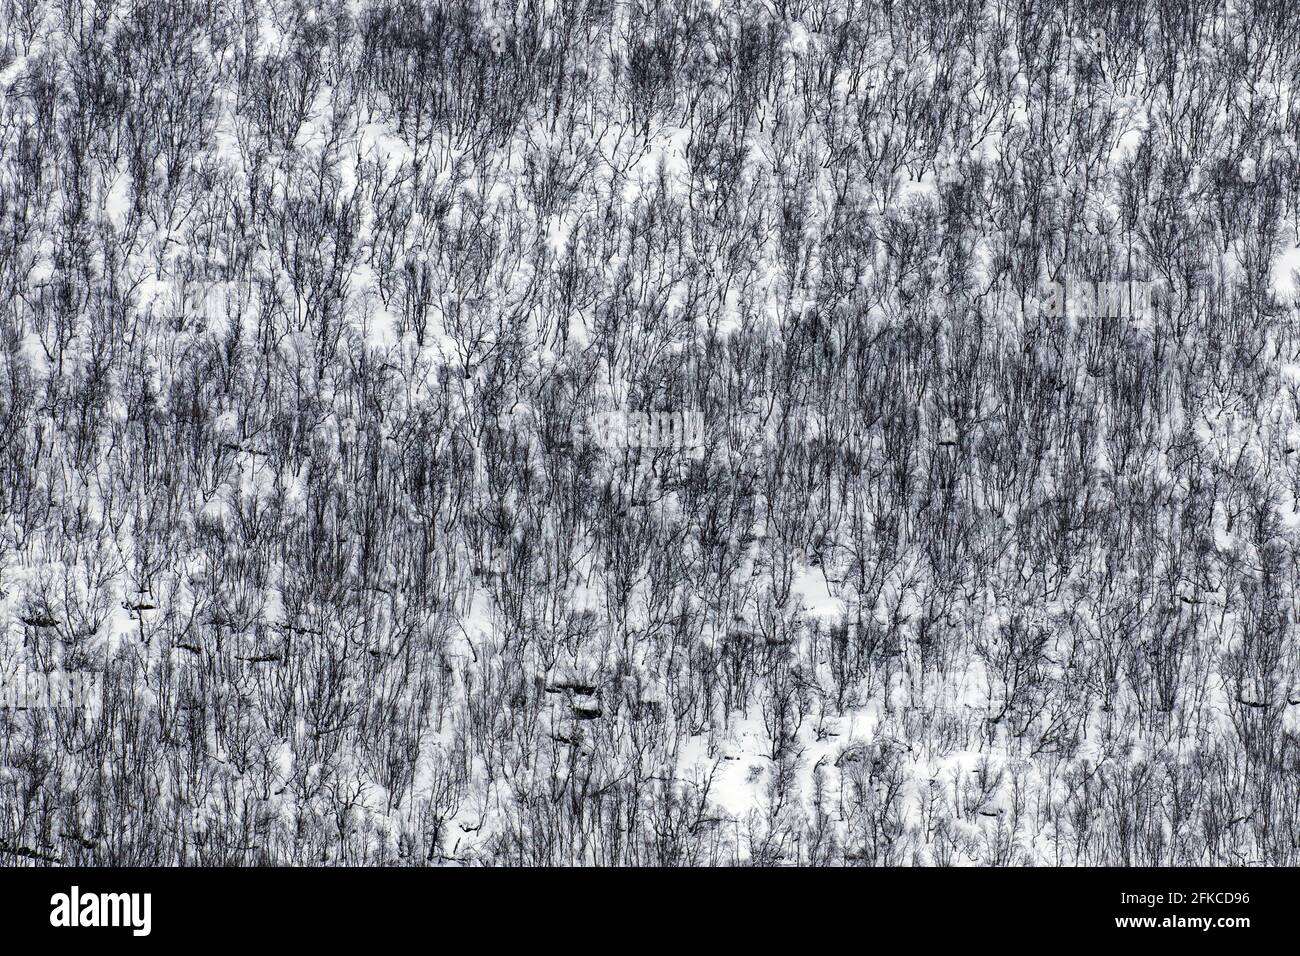 Abstract photo showing aerial view over birch trees in the snow of taiga / boreal forest in winter Stock Photo